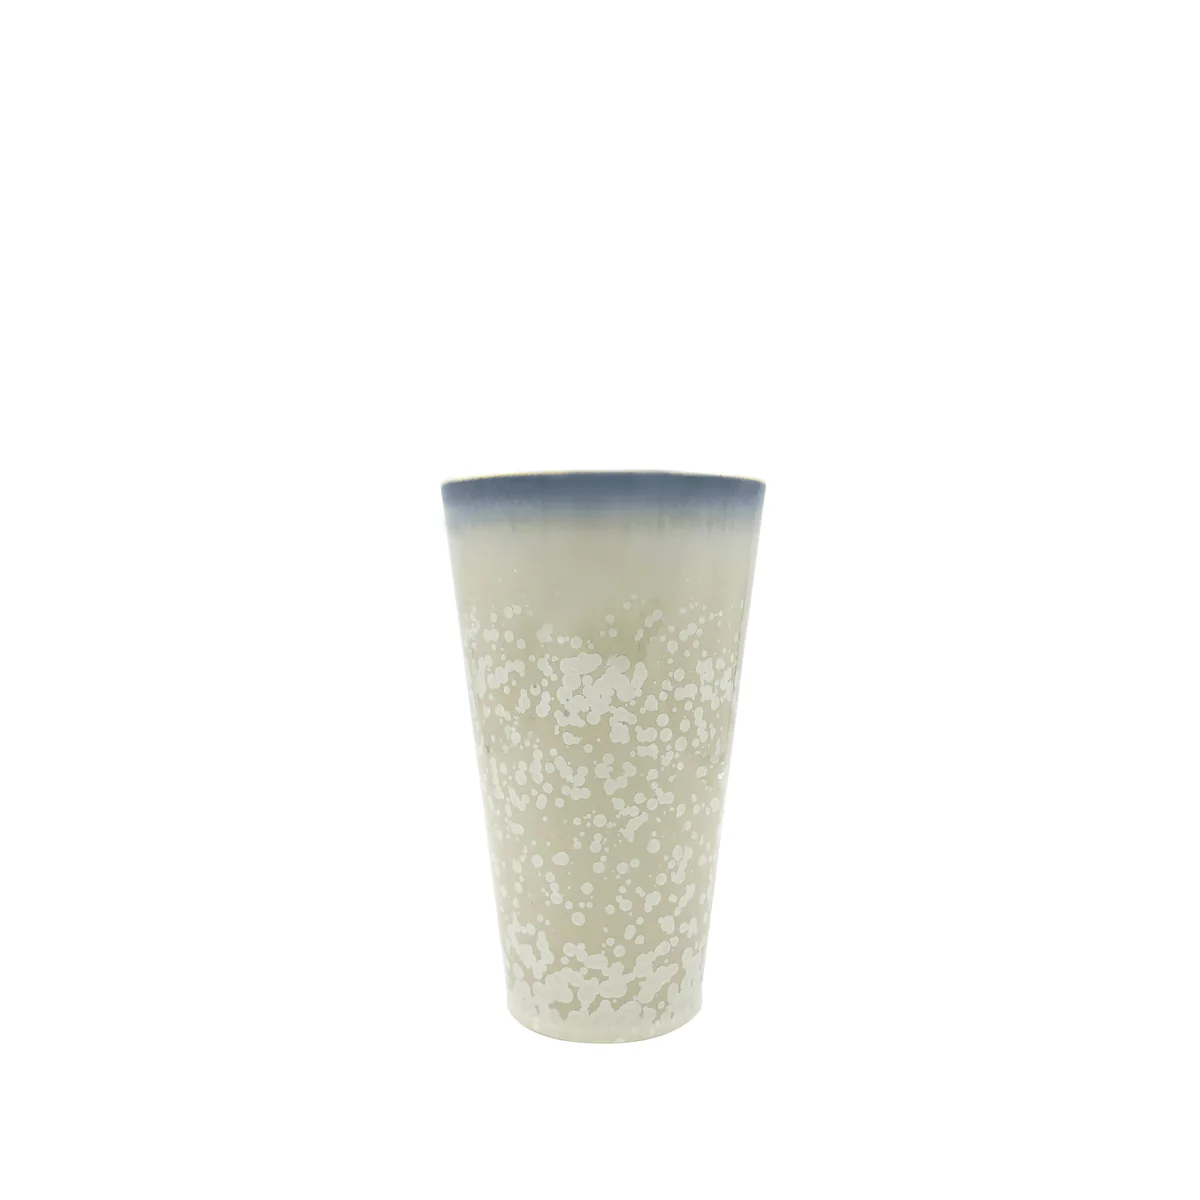 SONG Perle - Straight vase, small